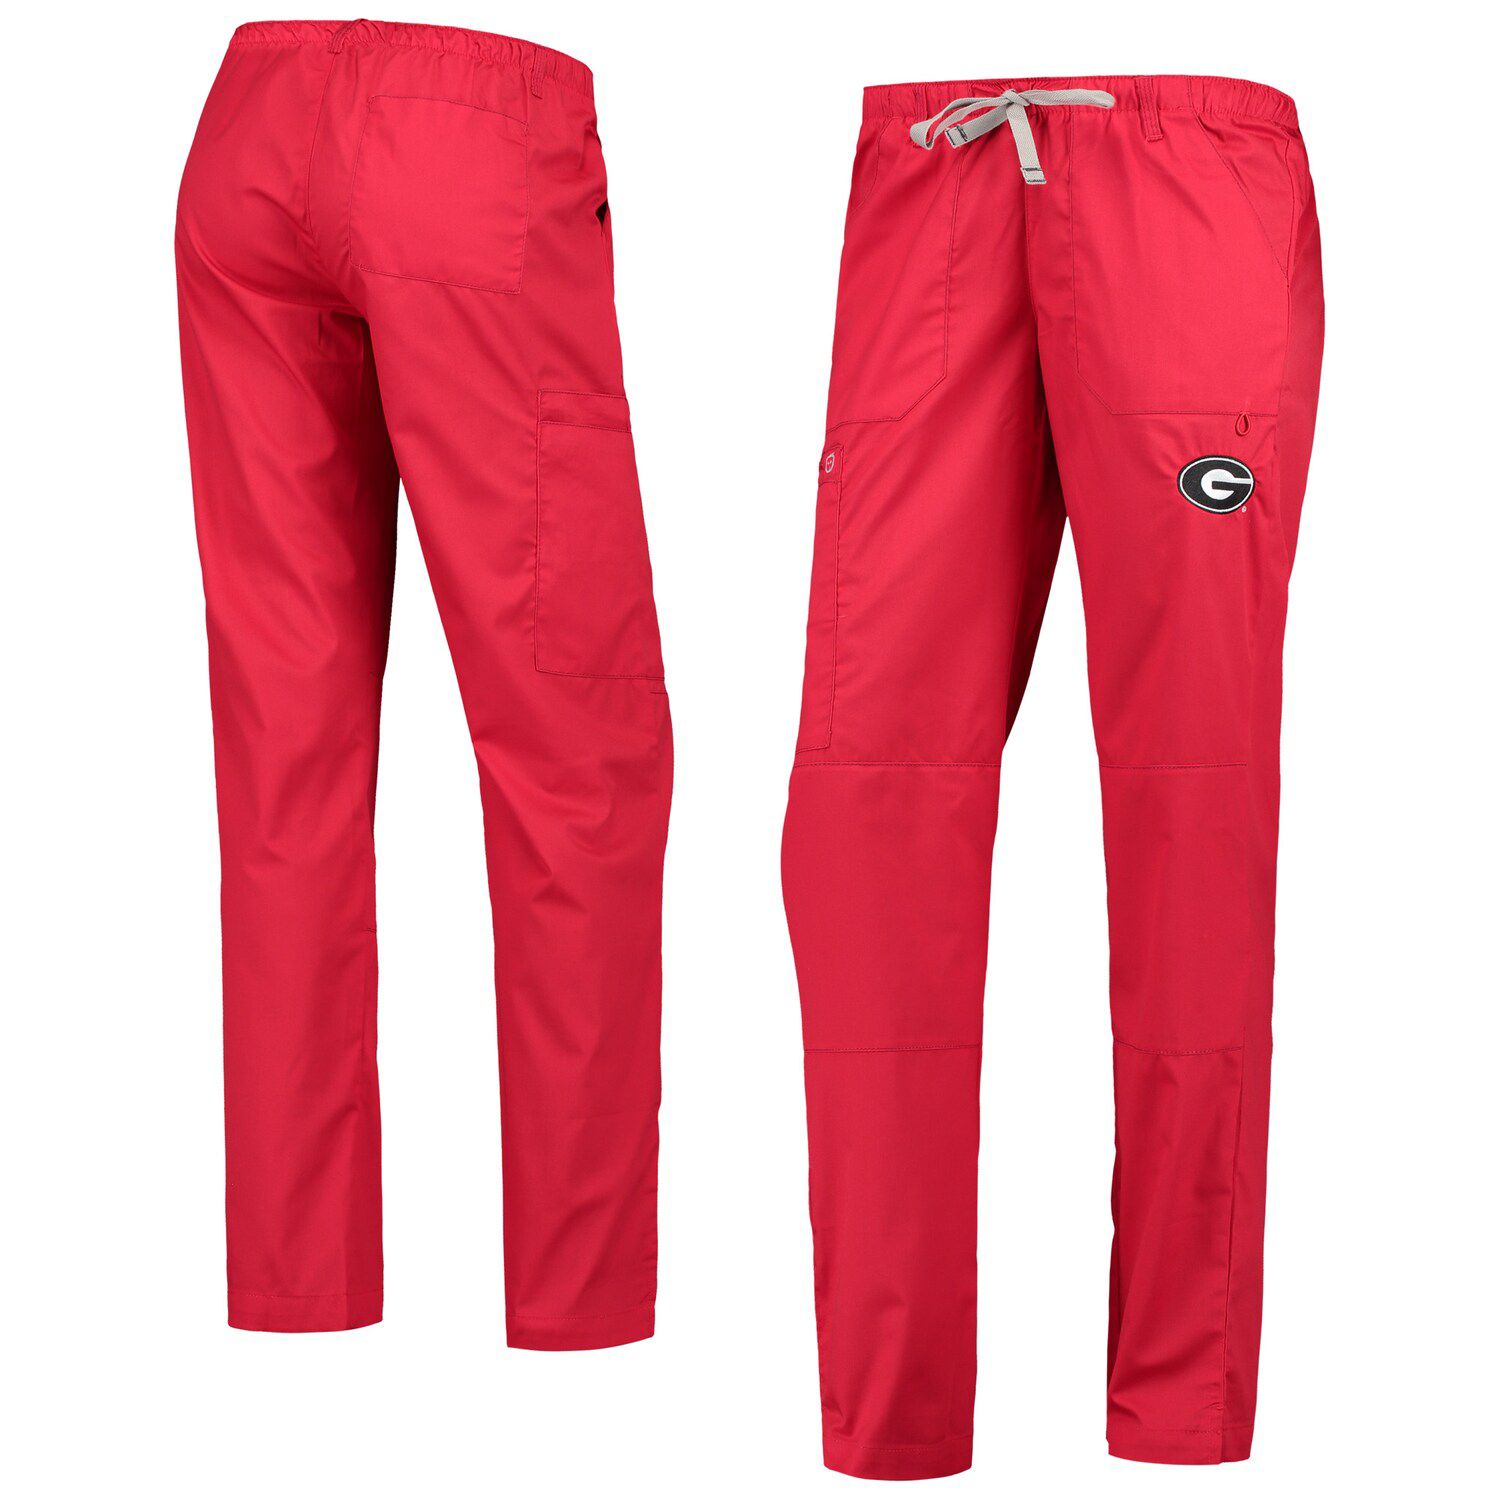 red cargo pants womens